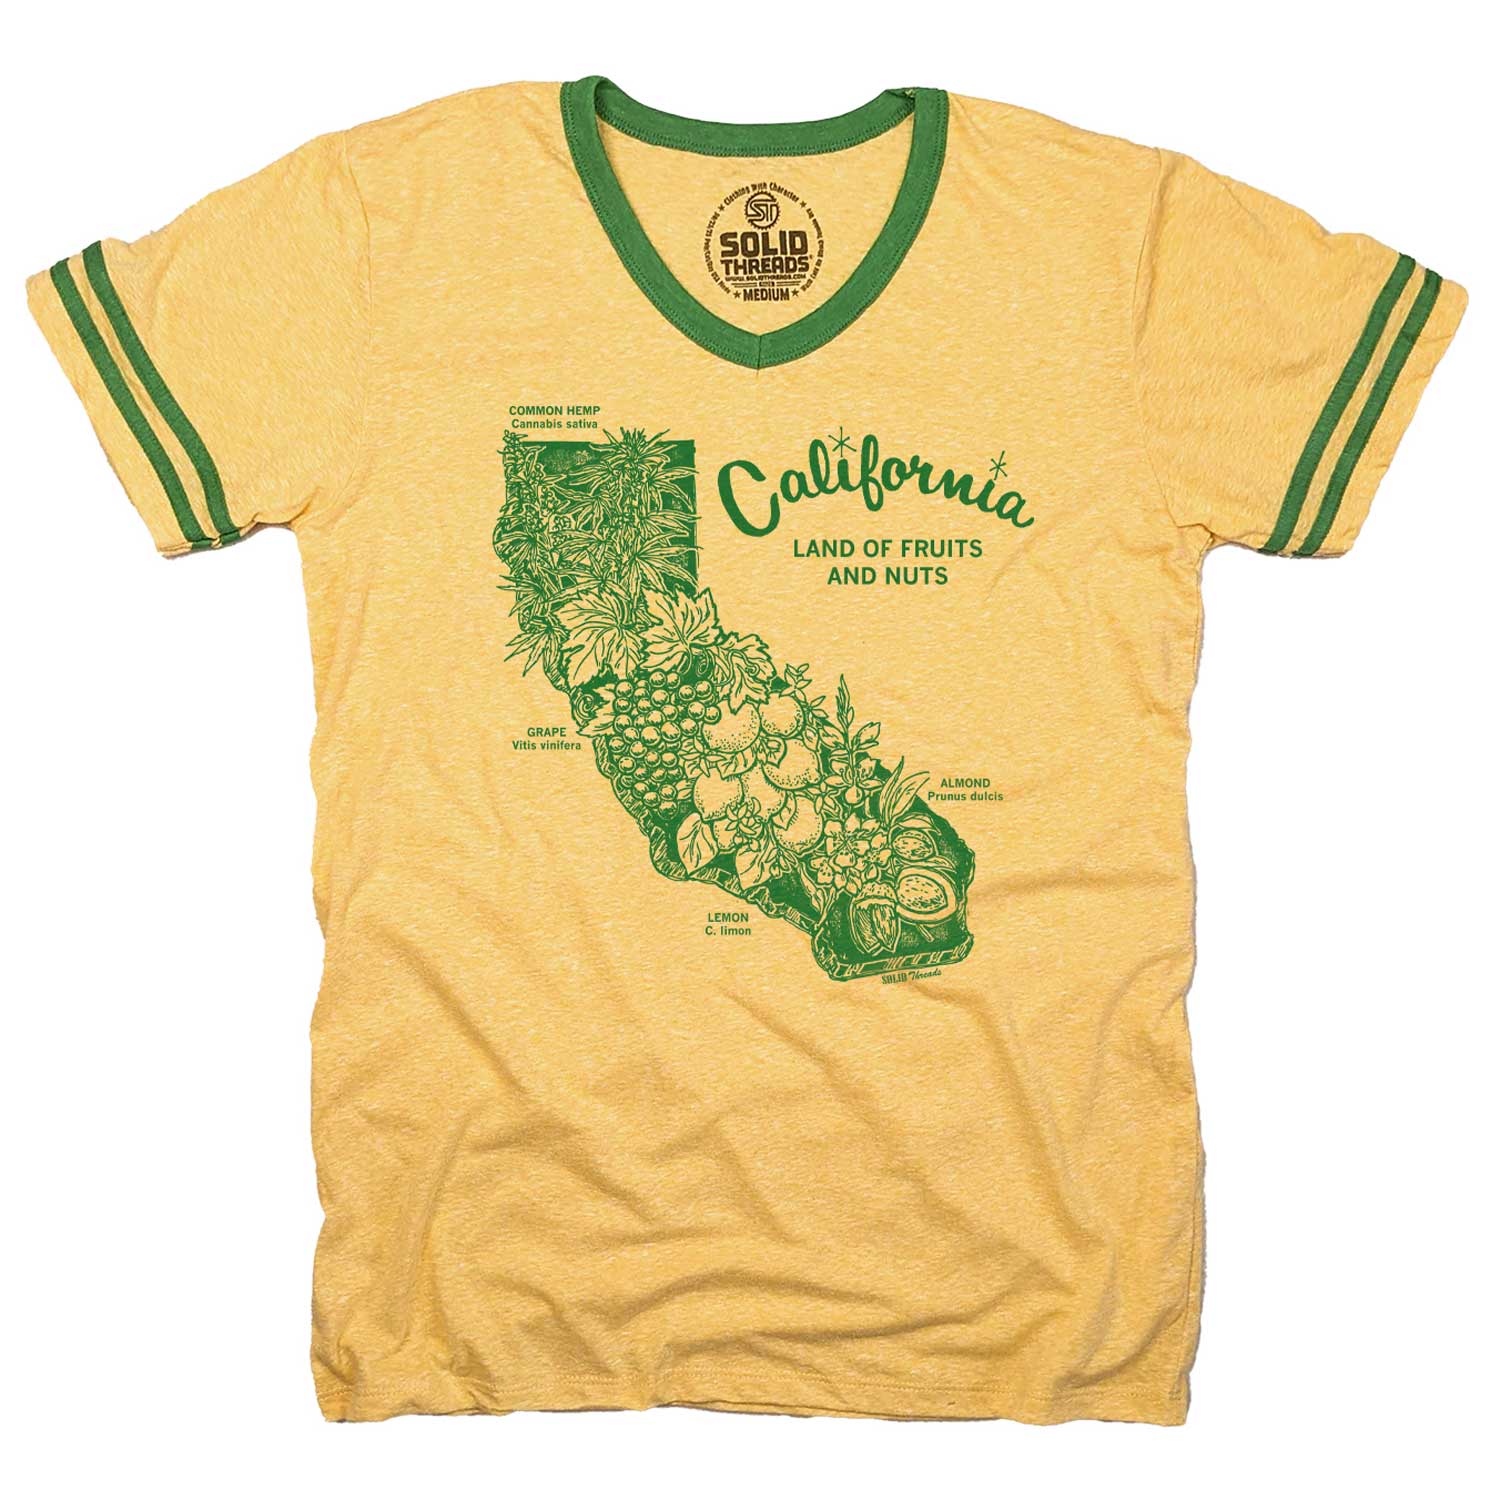 Luske Den anden dag Fascinate Men's California Land of Fruits and Nuts Cool Funny Graphic V-Neck Tee -  Solid Threads